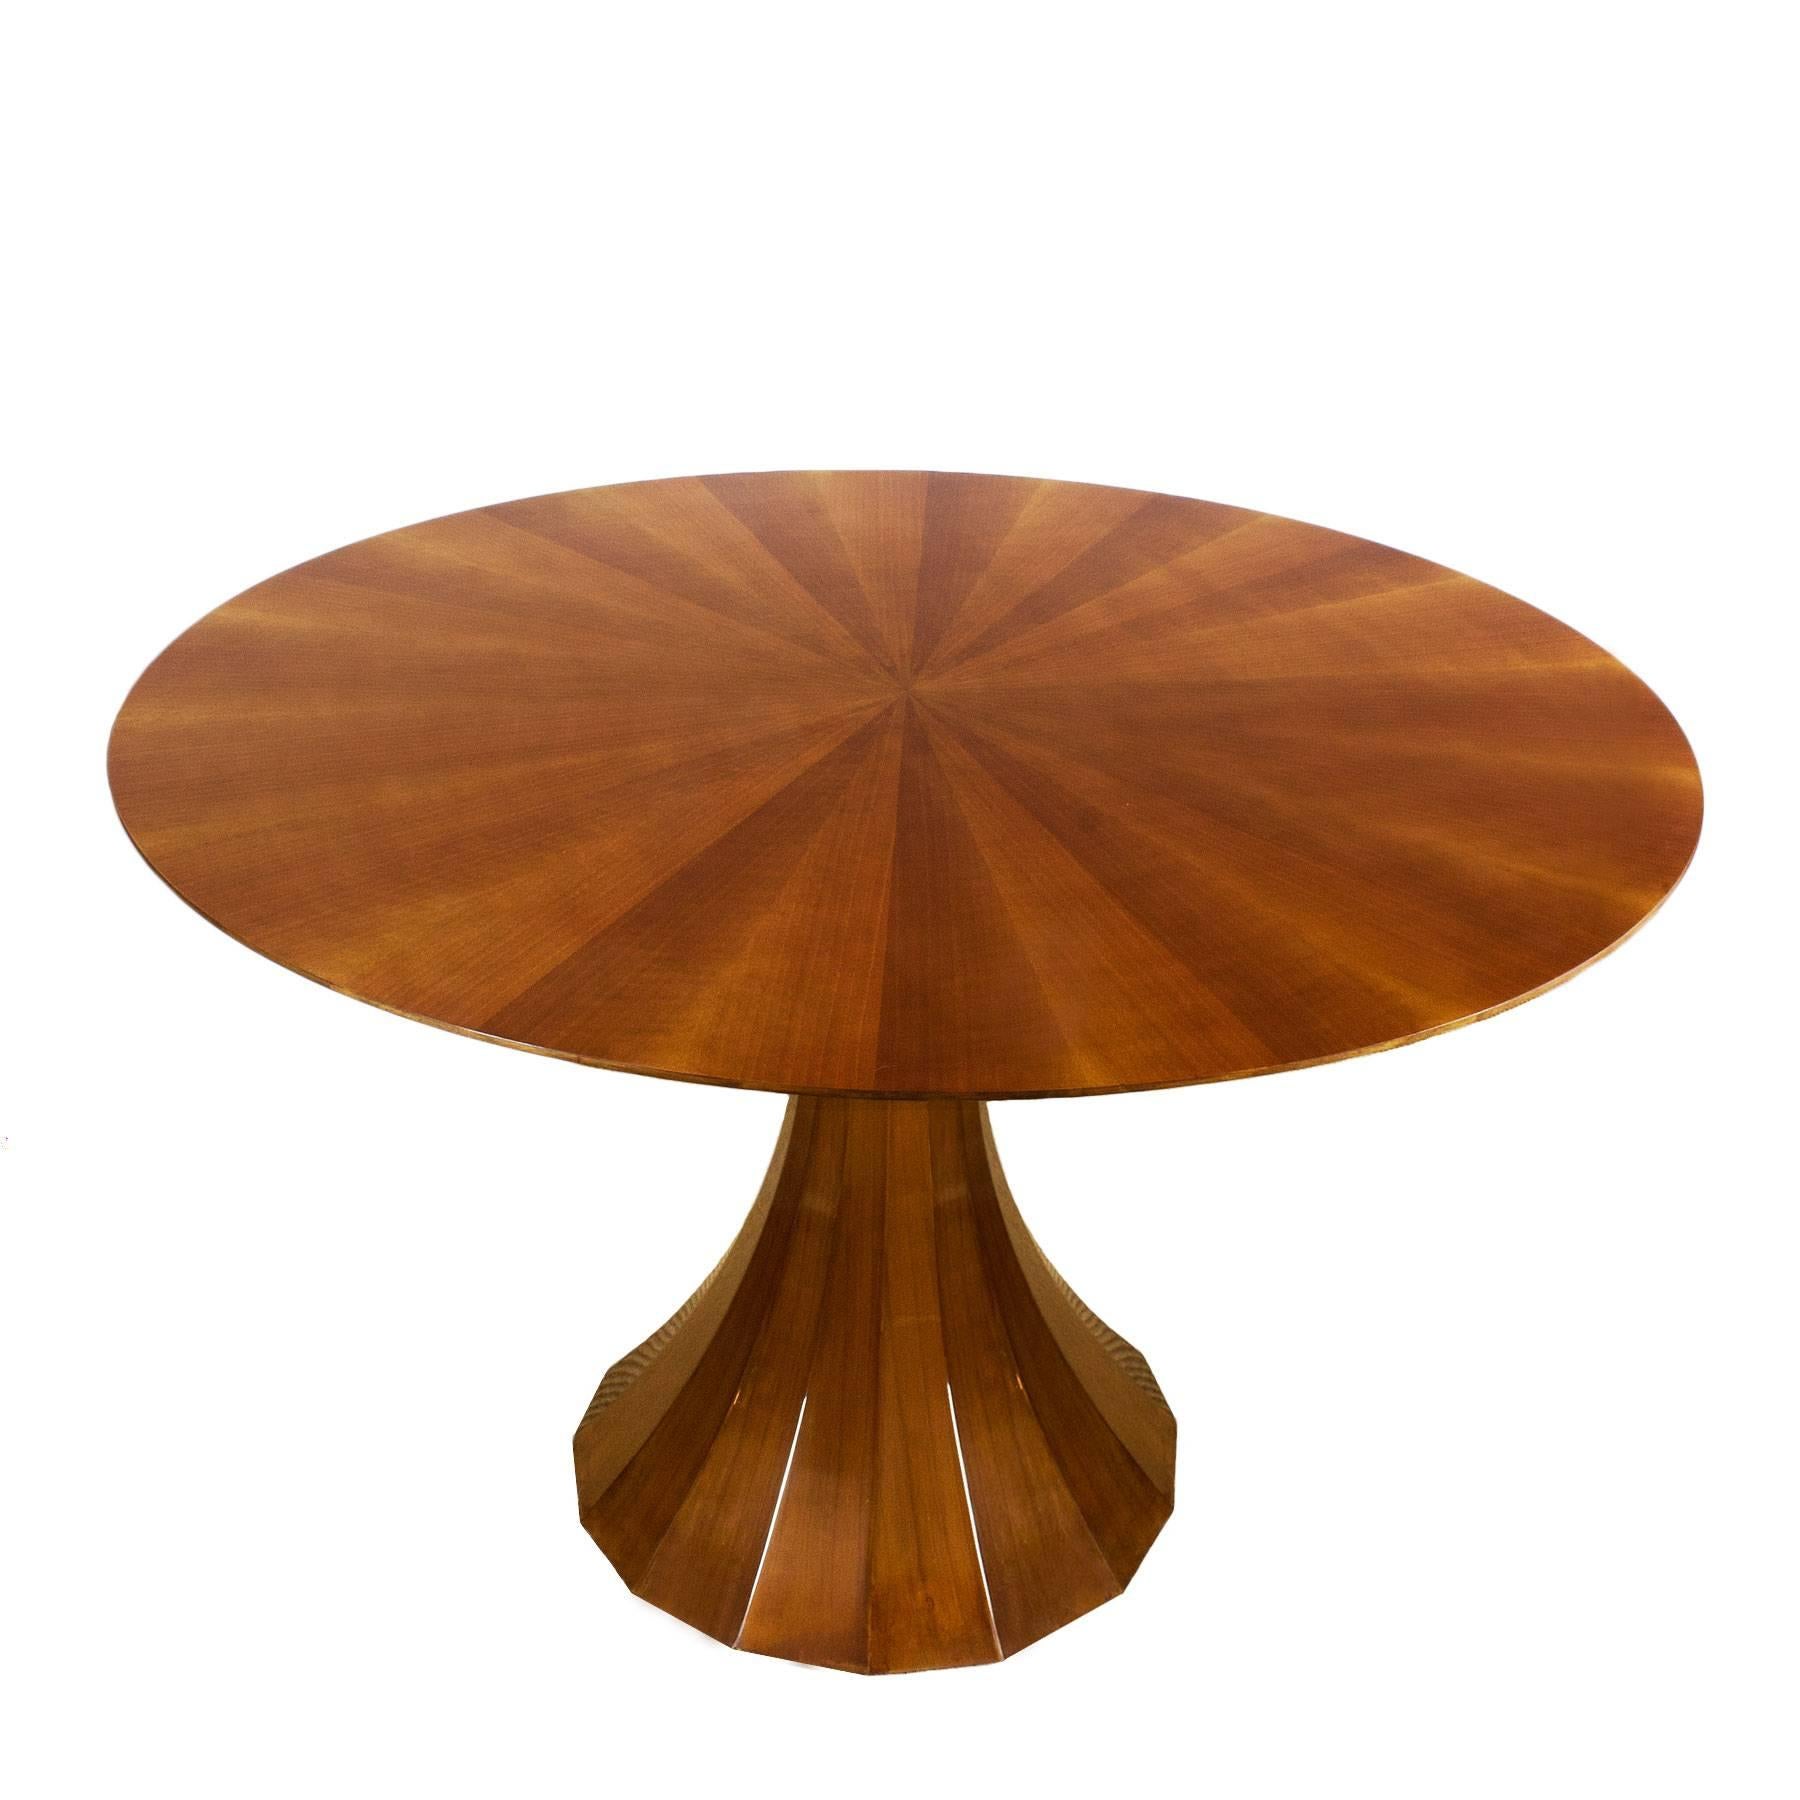 Round table with central polygonal stand, walnut veneer. Rays of sunshine walnut marquetry on top. French polish.

Italy, circa 1960.